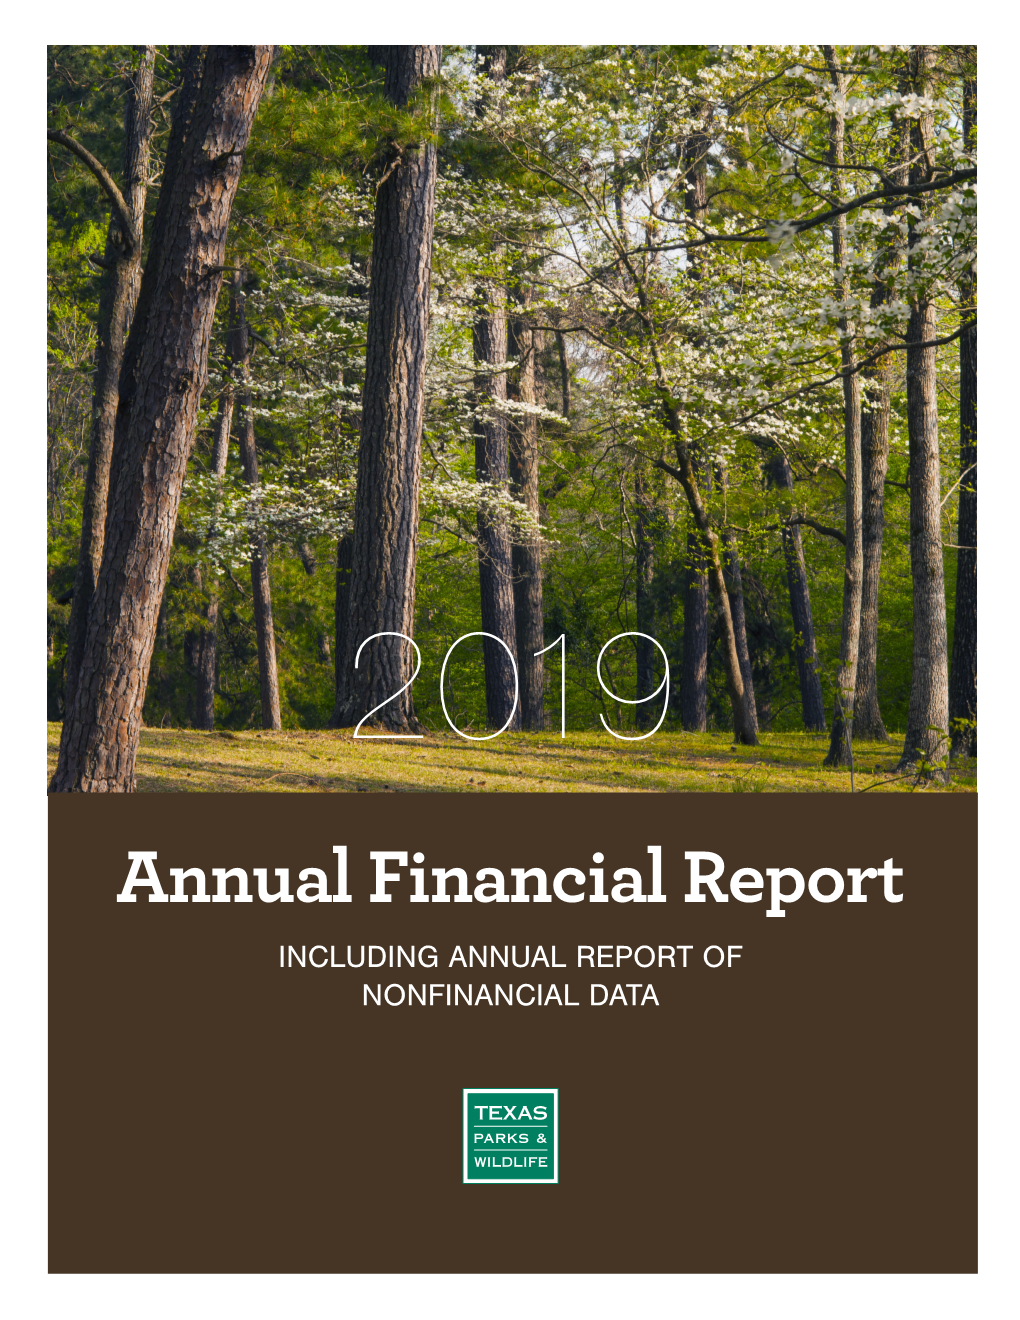 FY19 Annual Financial Report